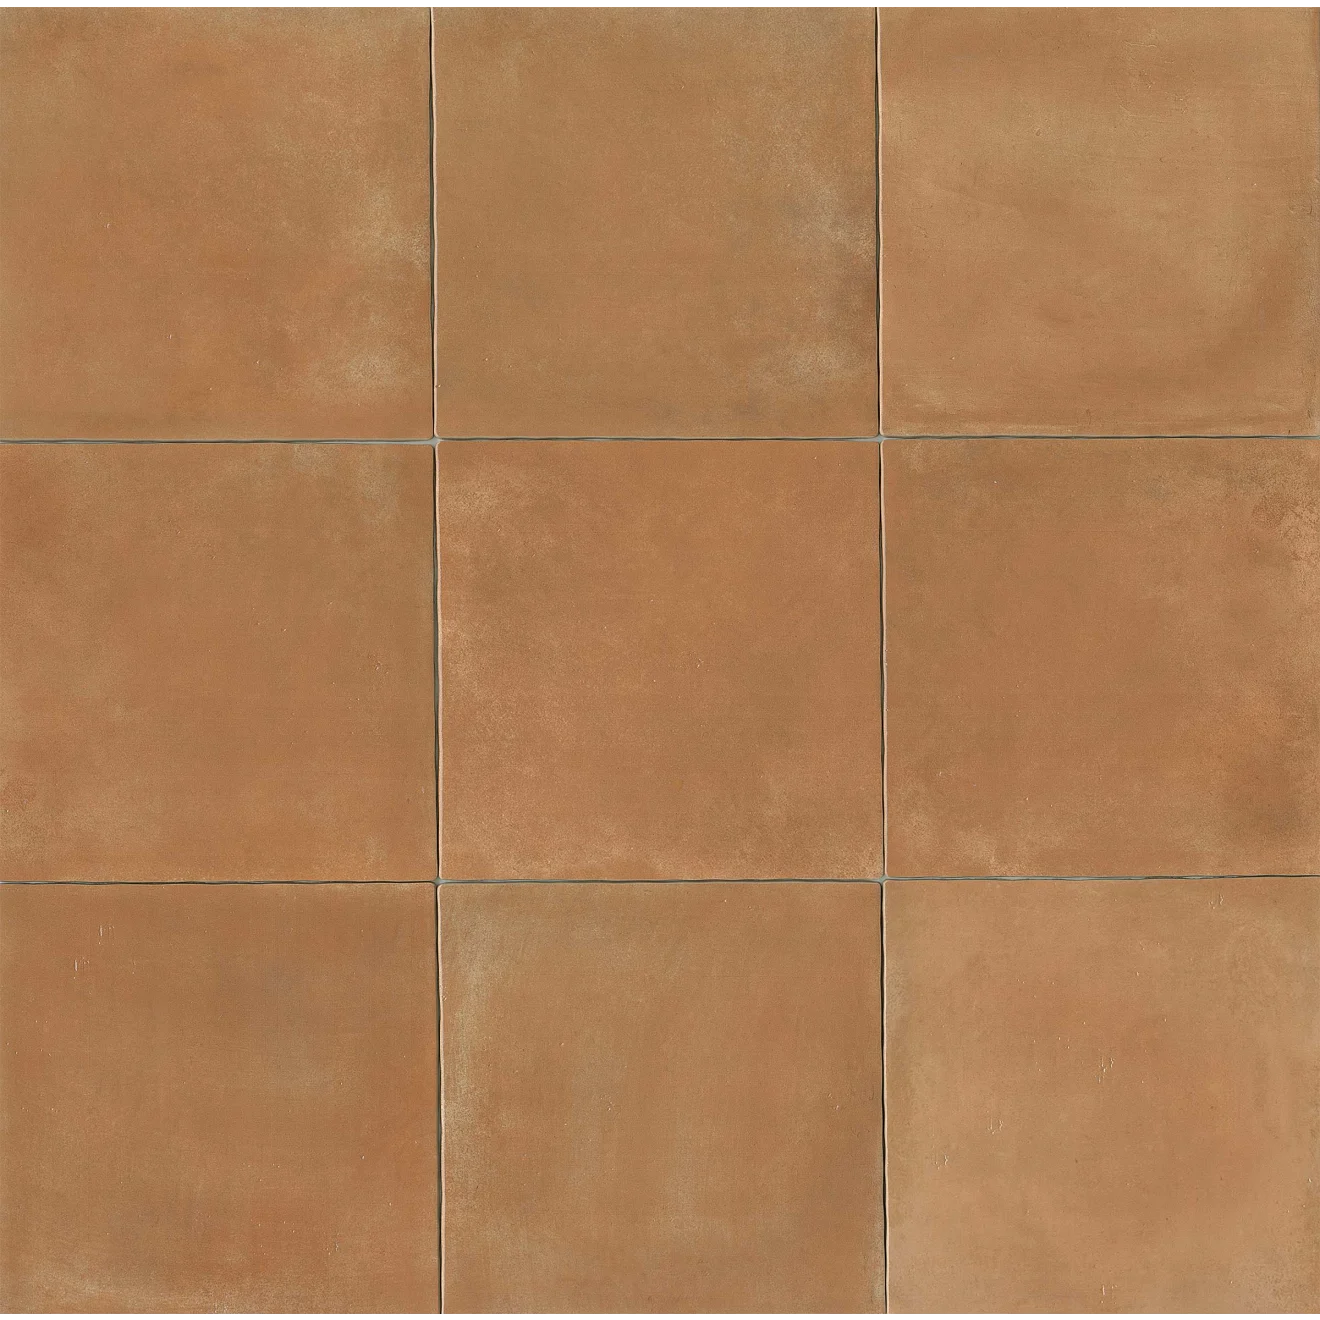 Cotto Nature Wall & Floor Tile